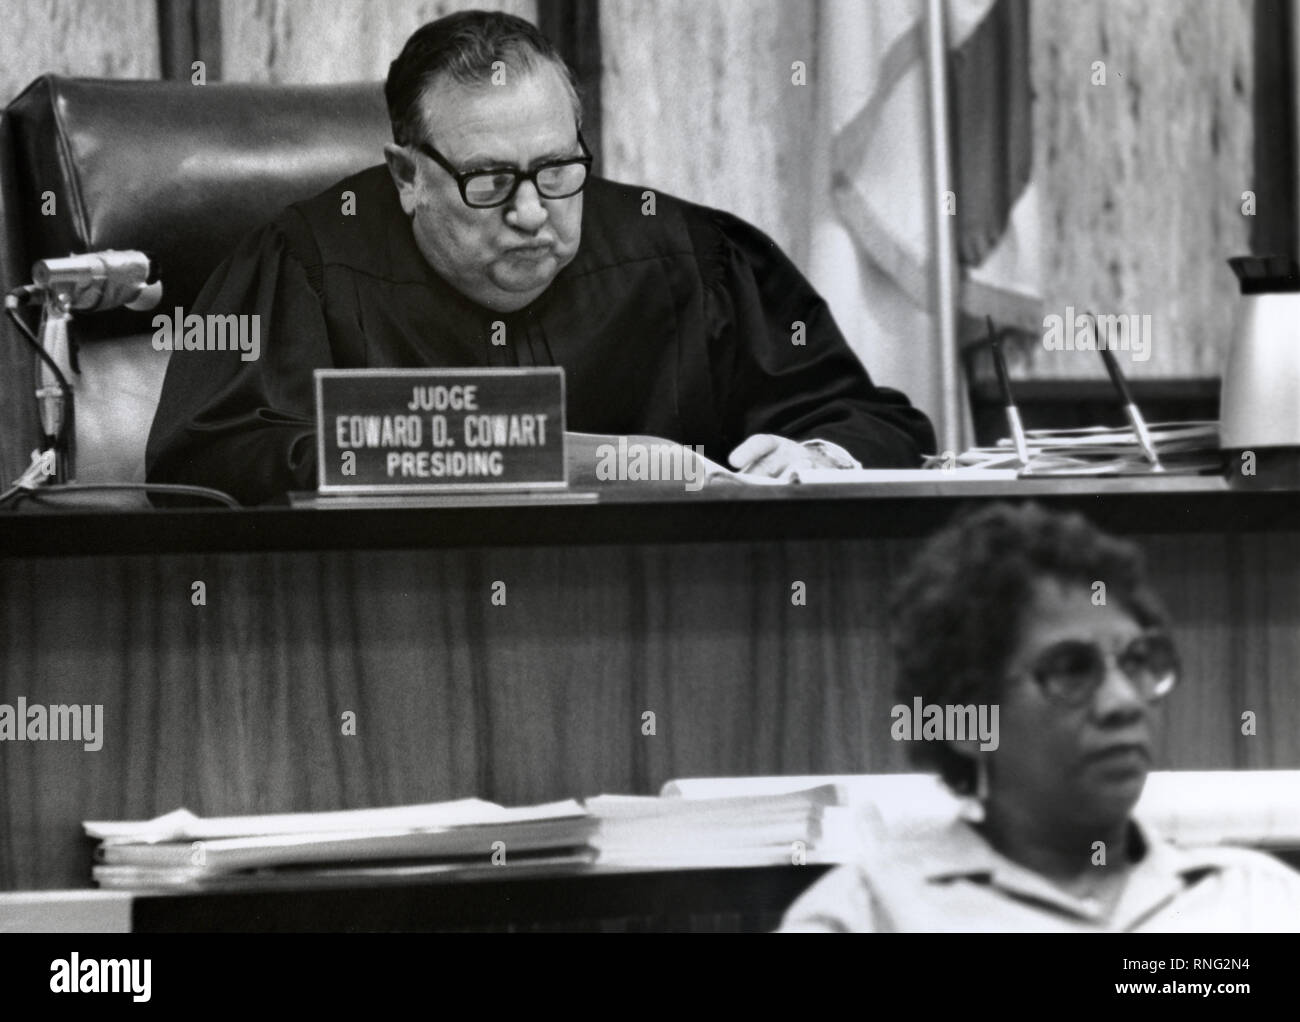 Judge Edward Cowart presides over the Ted Bundy Murder Trial - Miami - Ted Bundy with defense attorney Margaret Good at the defense table. Theodore Robert Bundy was an American serial killer, kidnapper, rapist, burglar, and necrophile who assaulted and murdered numerous young women and girls during the 1970s and possibly earlier. After more than a decade of denials, he confessed to 30 homicides that he committed in seven states between 1974 and 1978. Stock Photo